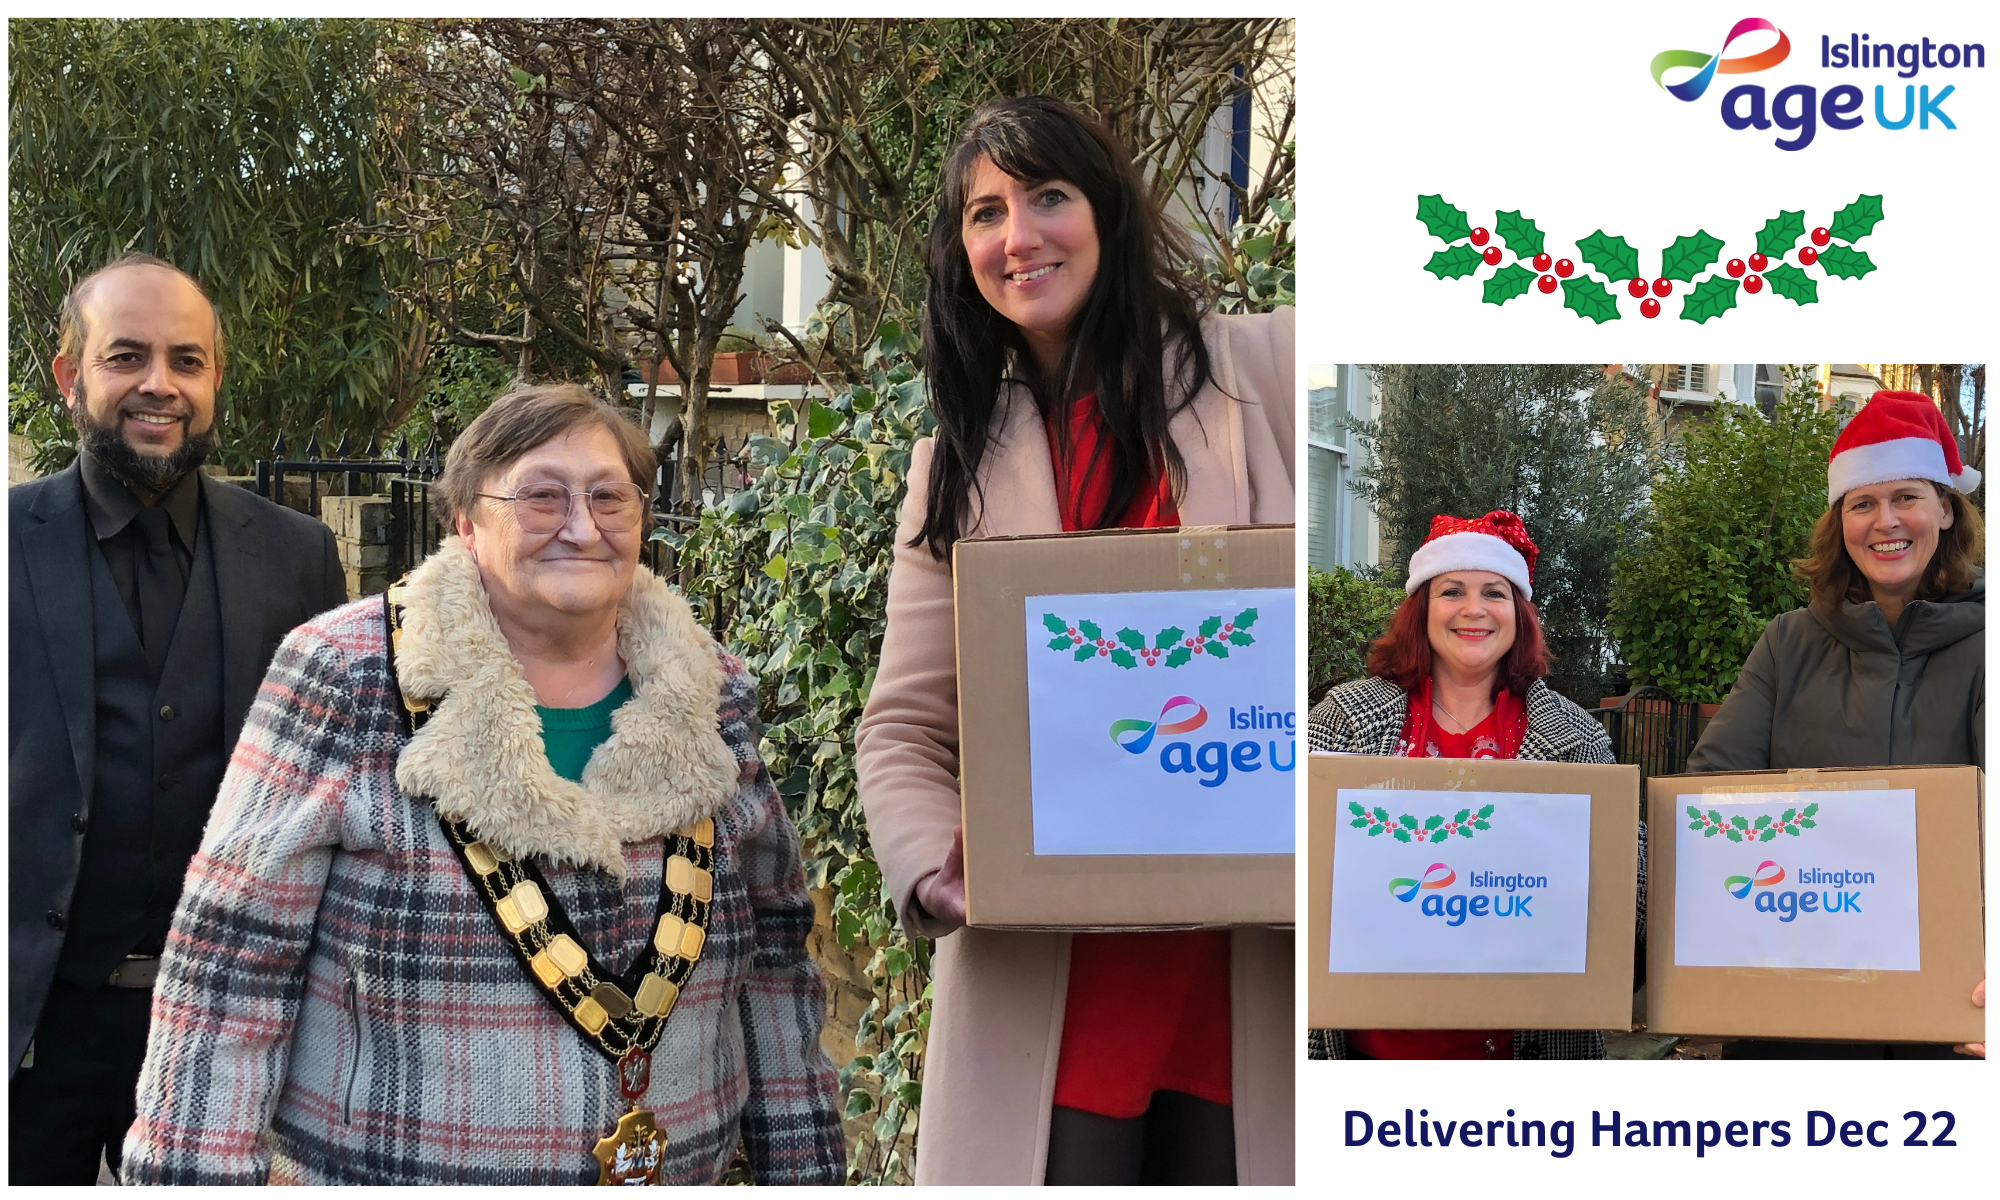 Delivering Hampers December 22 with Mayor of Islington, Cllr Marian Spall